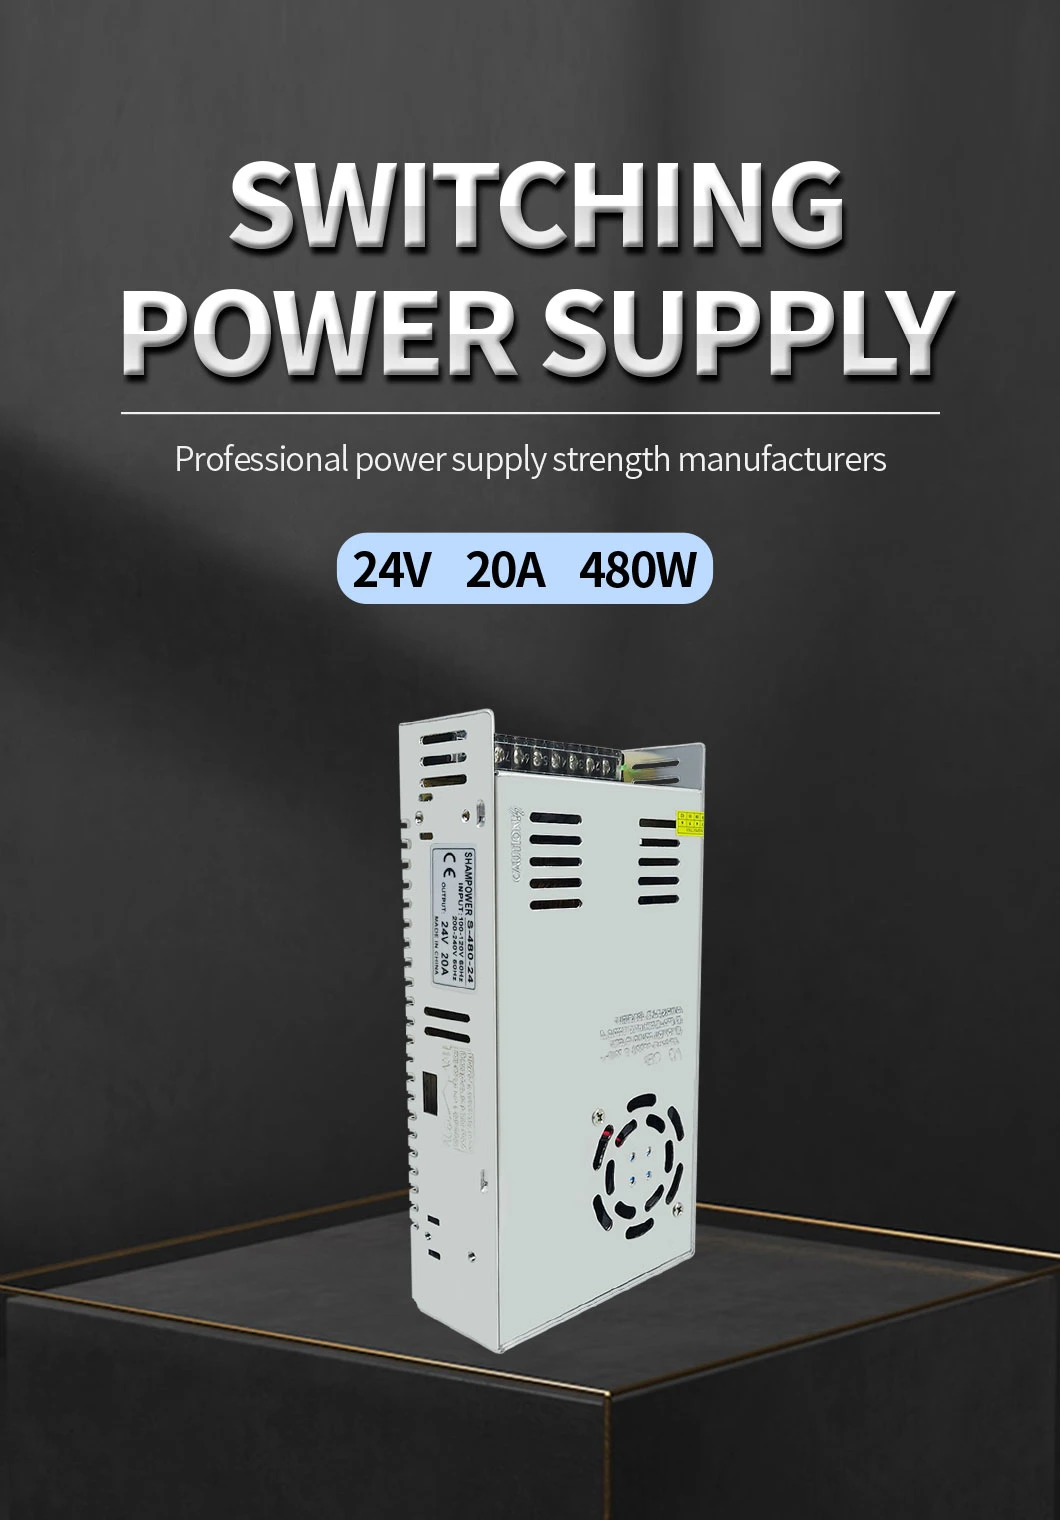 LED SMPS 24V20A 480W Switching Power Supply for LED Light